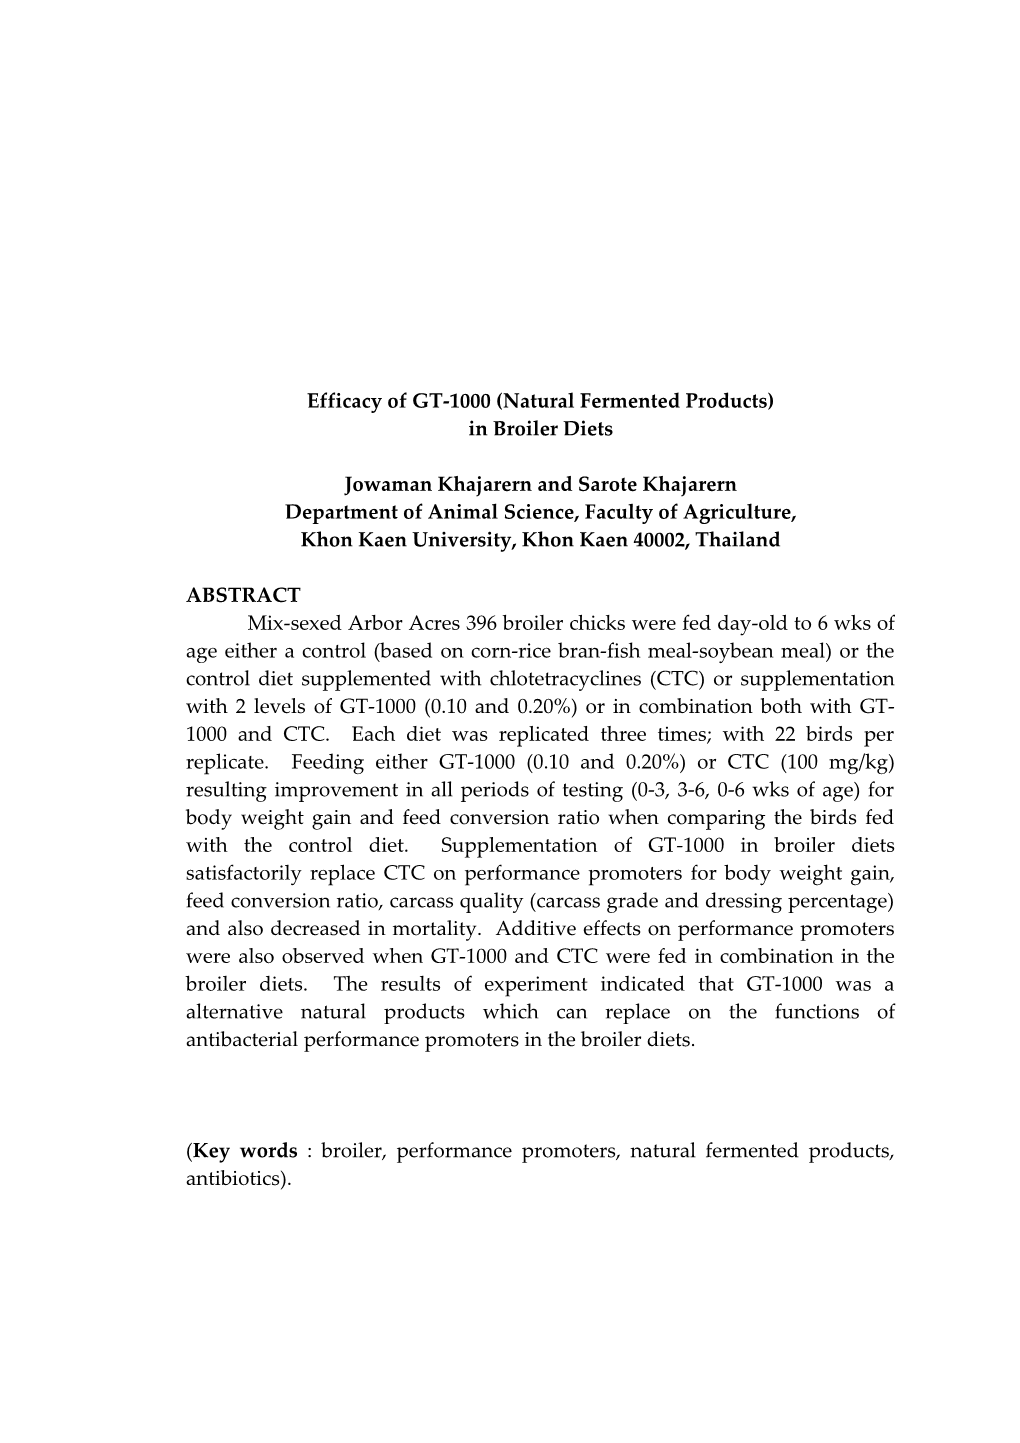 Efficacy of GT-1000 (Natural Fermented Products)